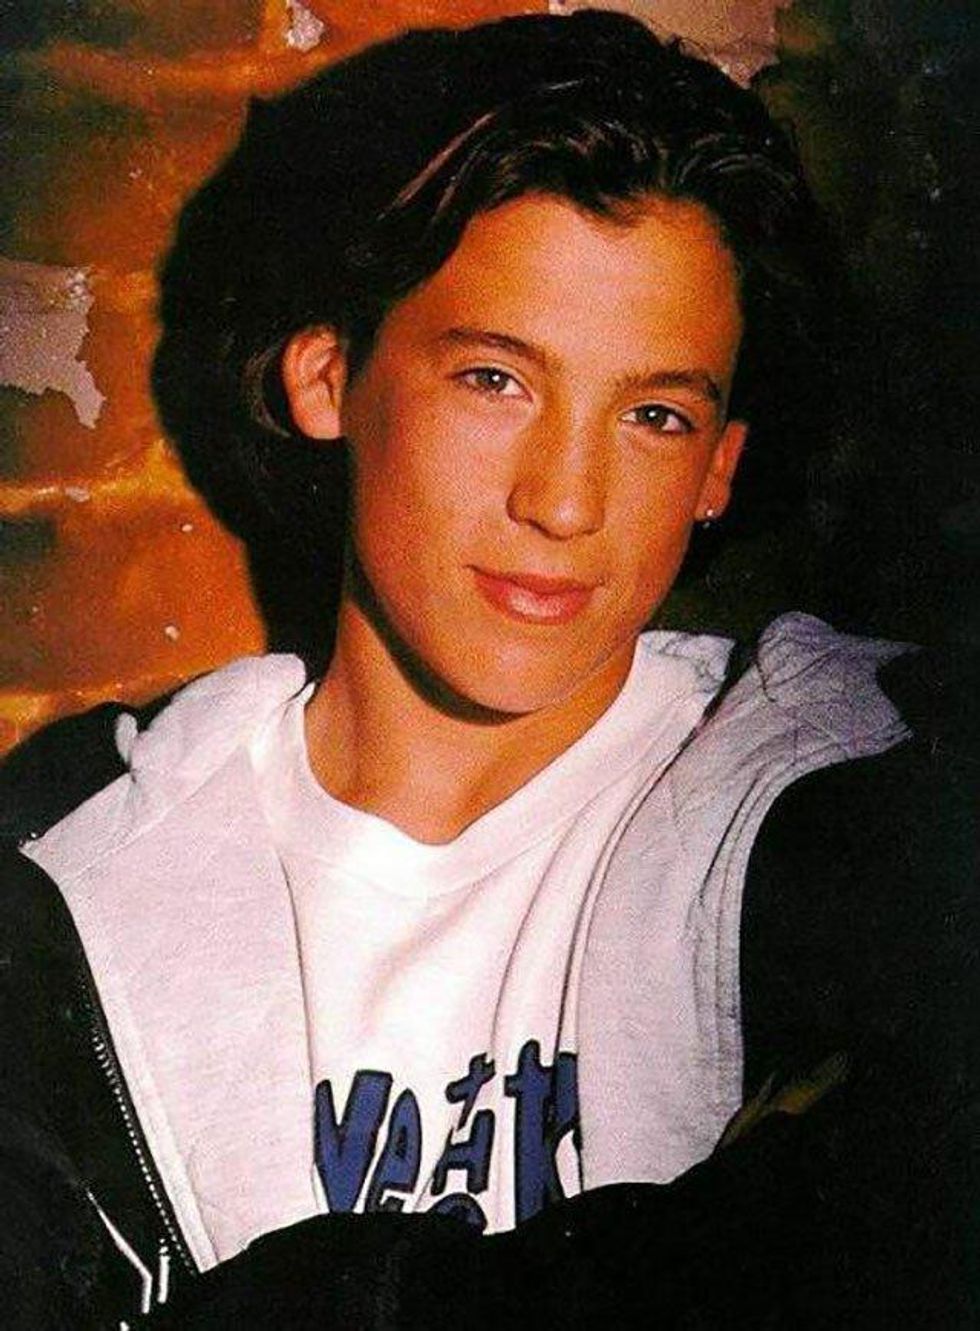 A collection of the hottest teen heartthrobs of the 90s.